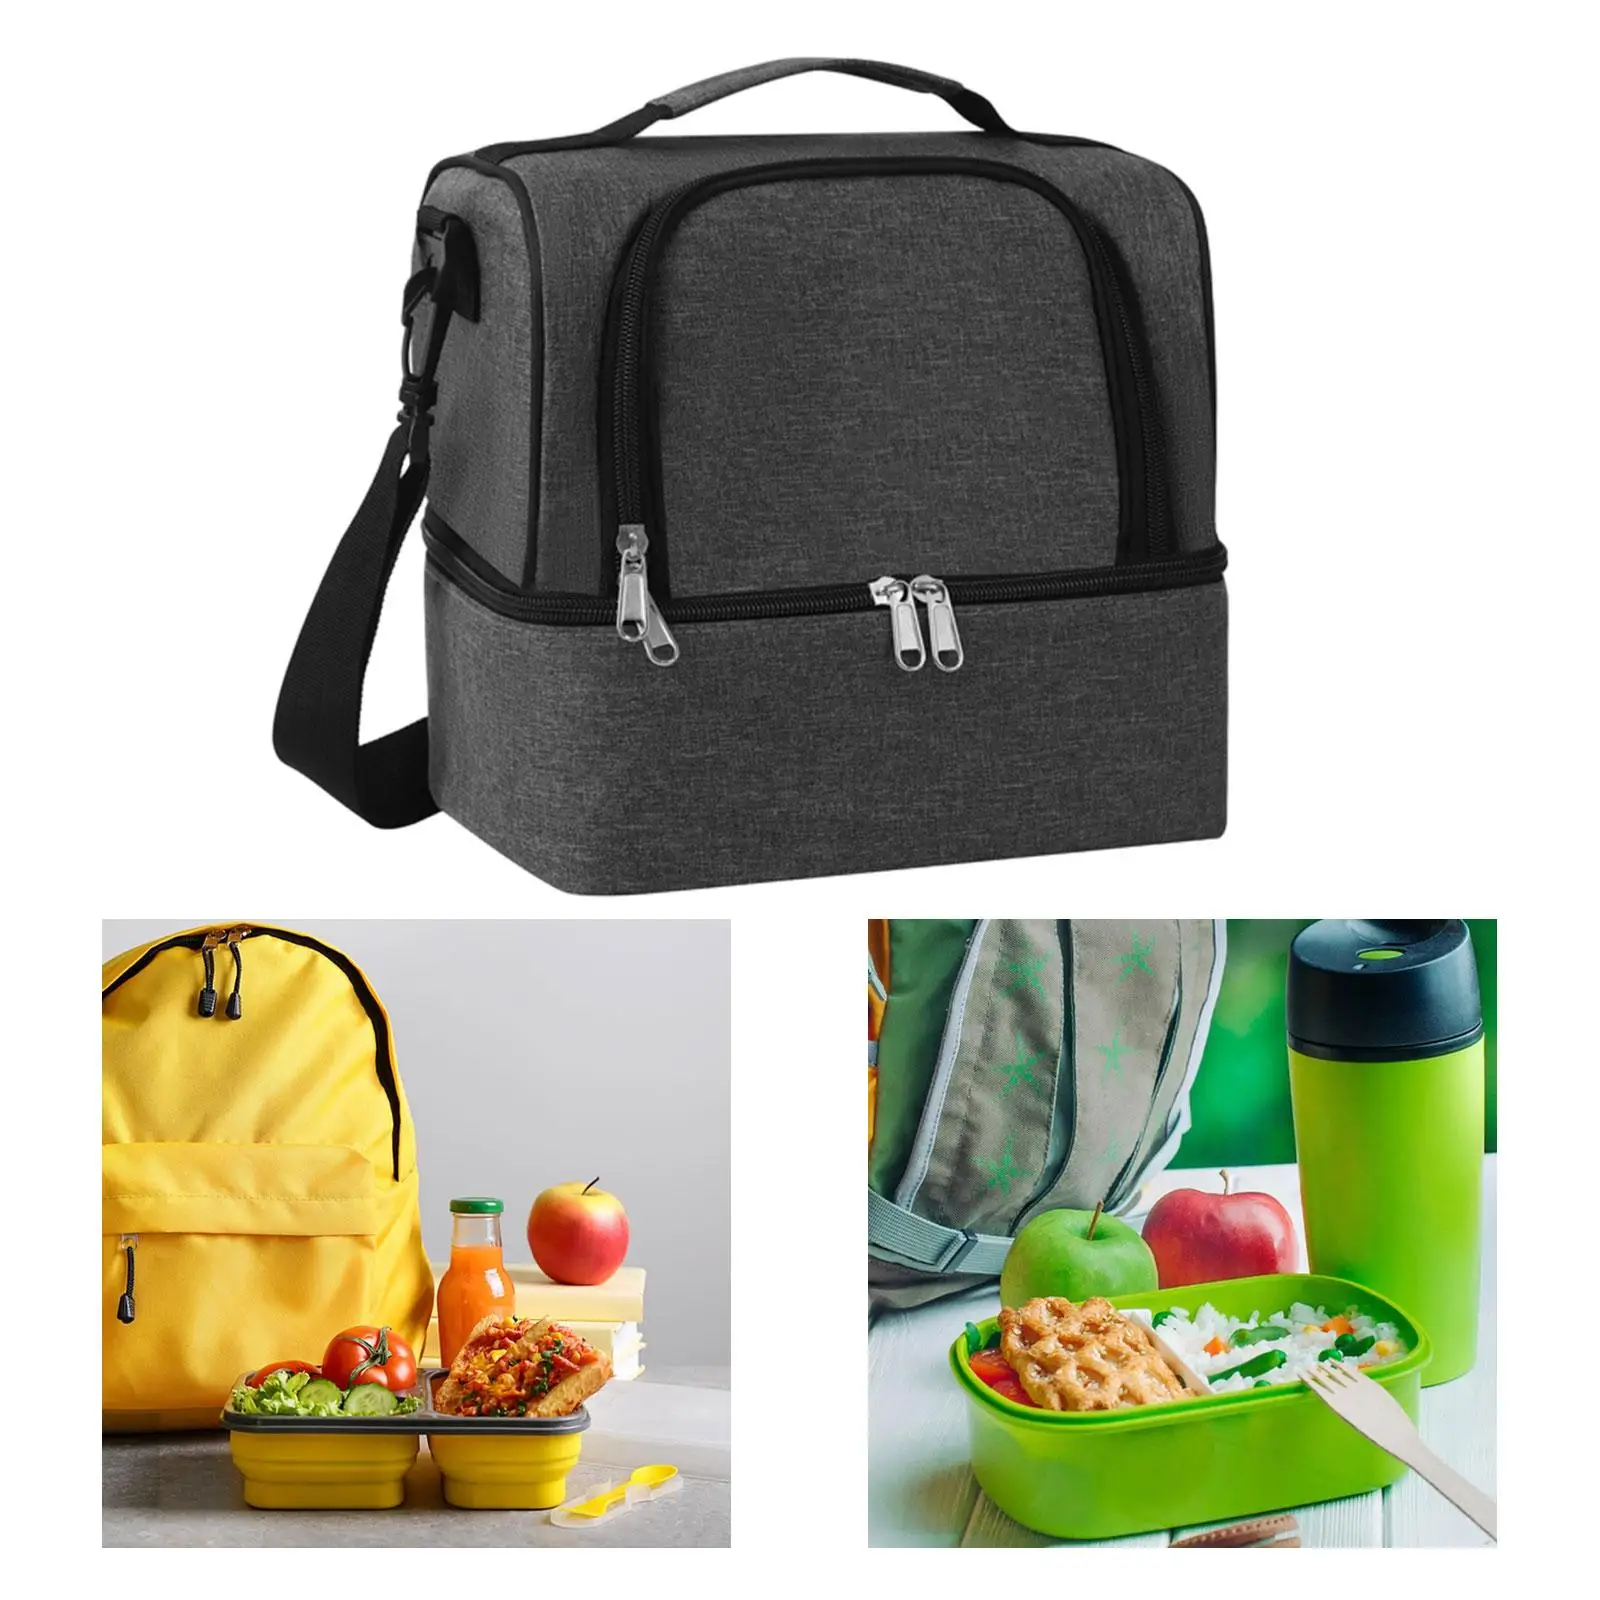 Insulated Lunch Case Reusable Cool Bag Lunchbox for Camping Picnic Travel